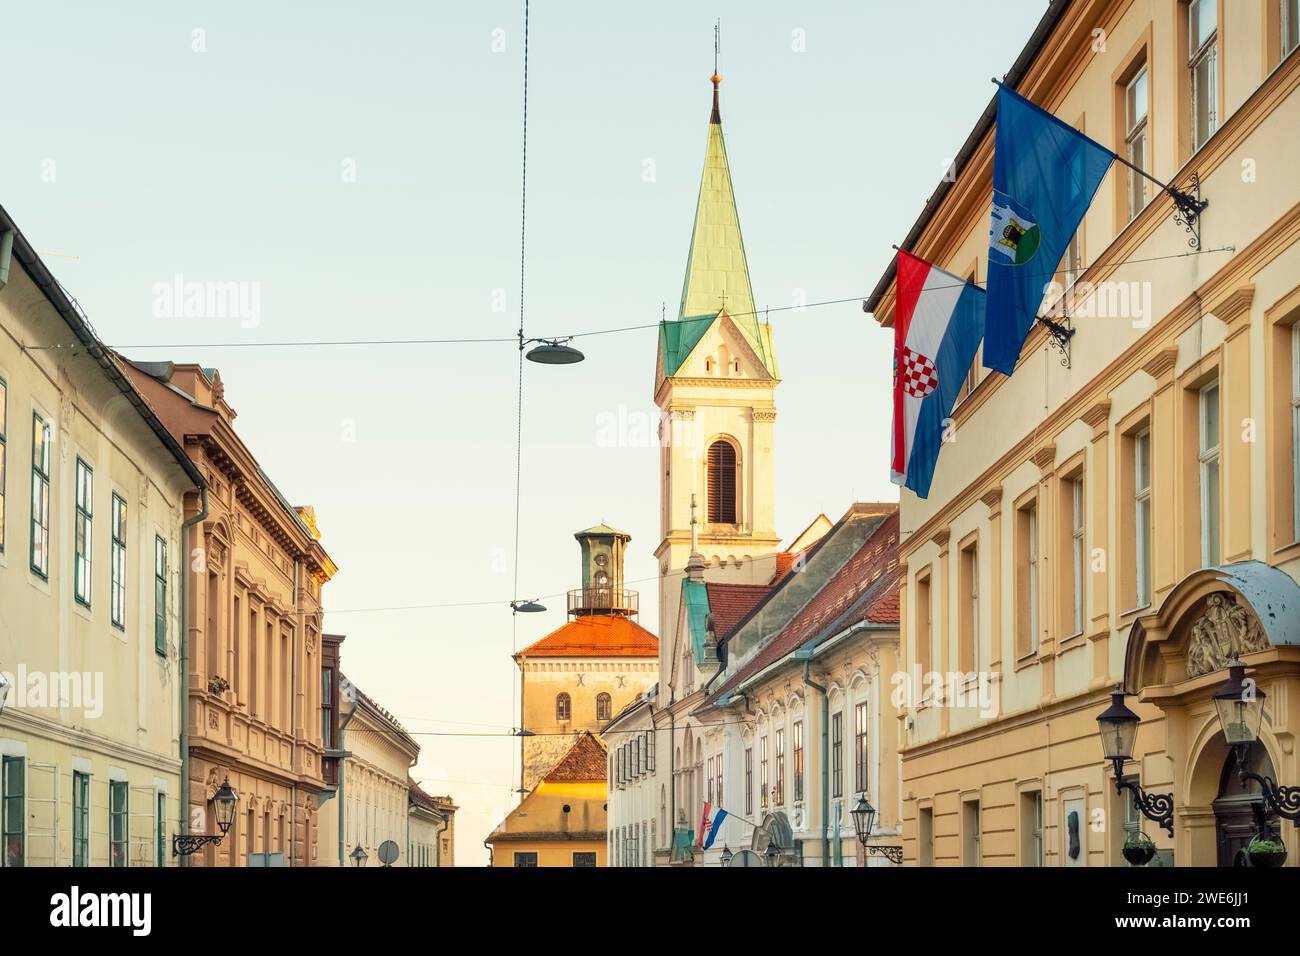 Croatia, Zagreb, Power lines hanging in front of Croatian Museum of Naive Art Stock Photo